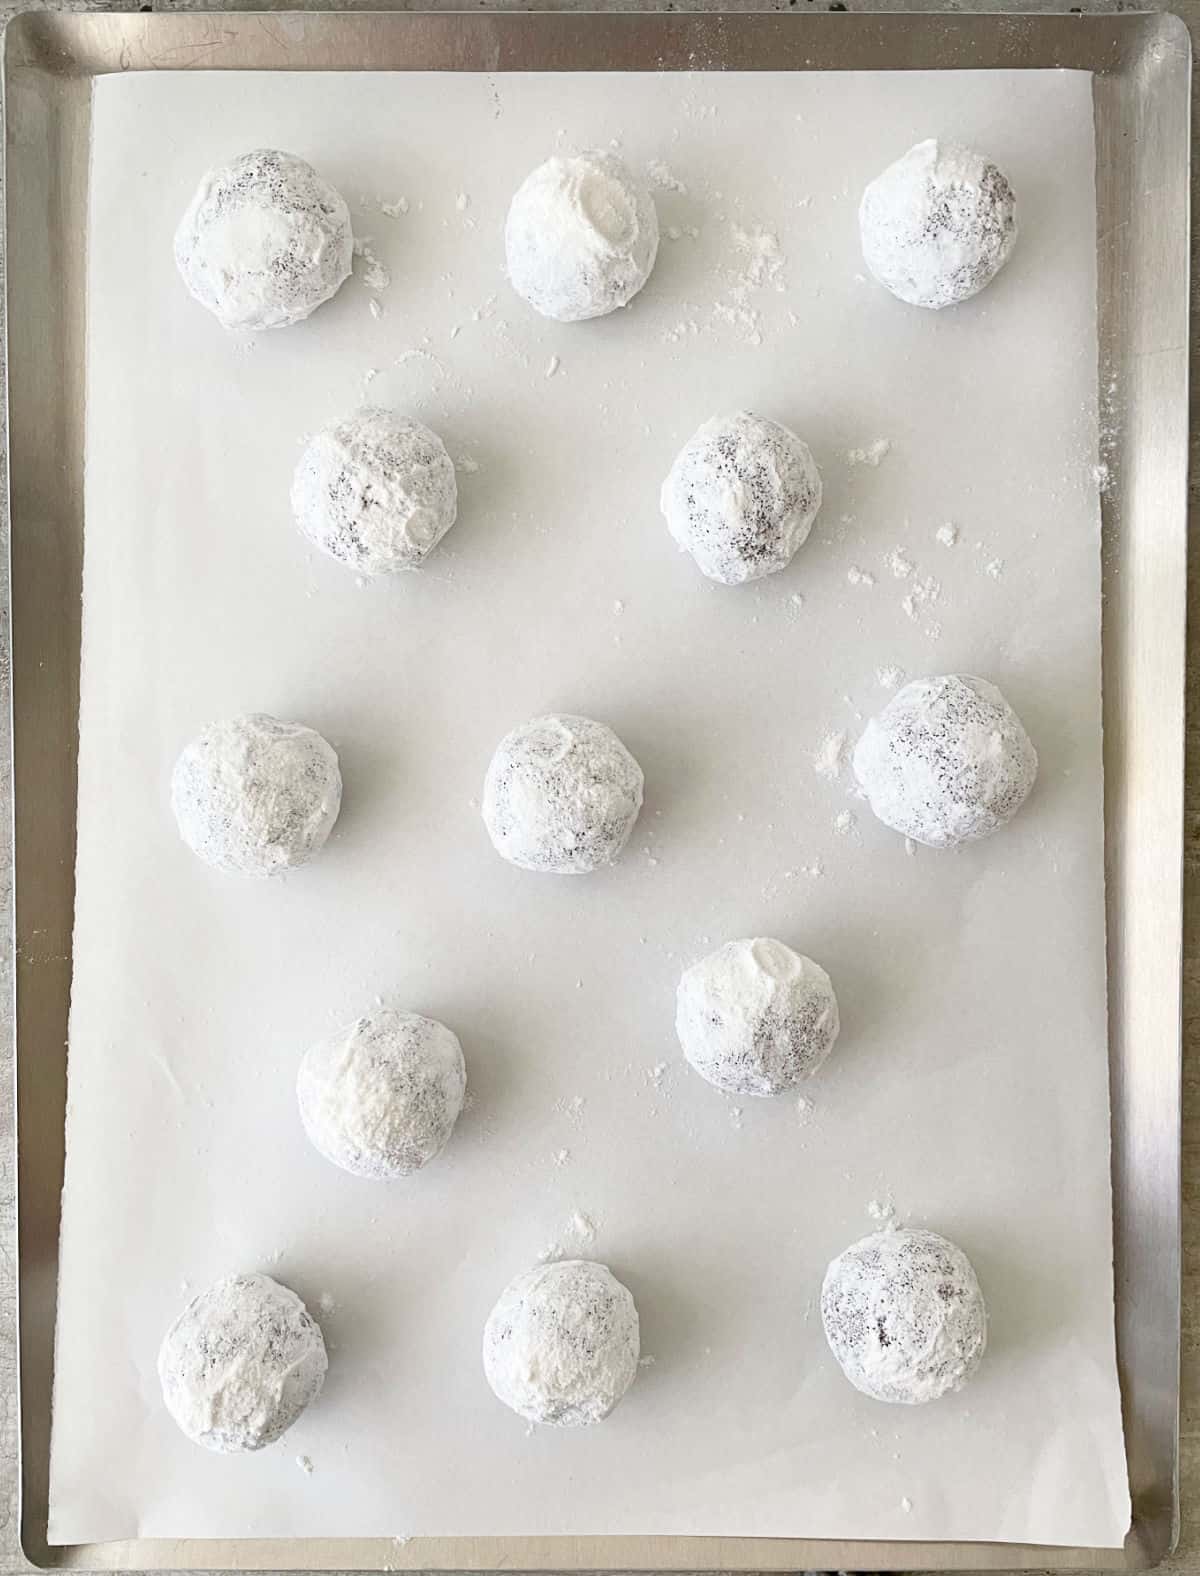 Powdered sugar coated cookie dough balls on parchment paper on a cookie sheet.